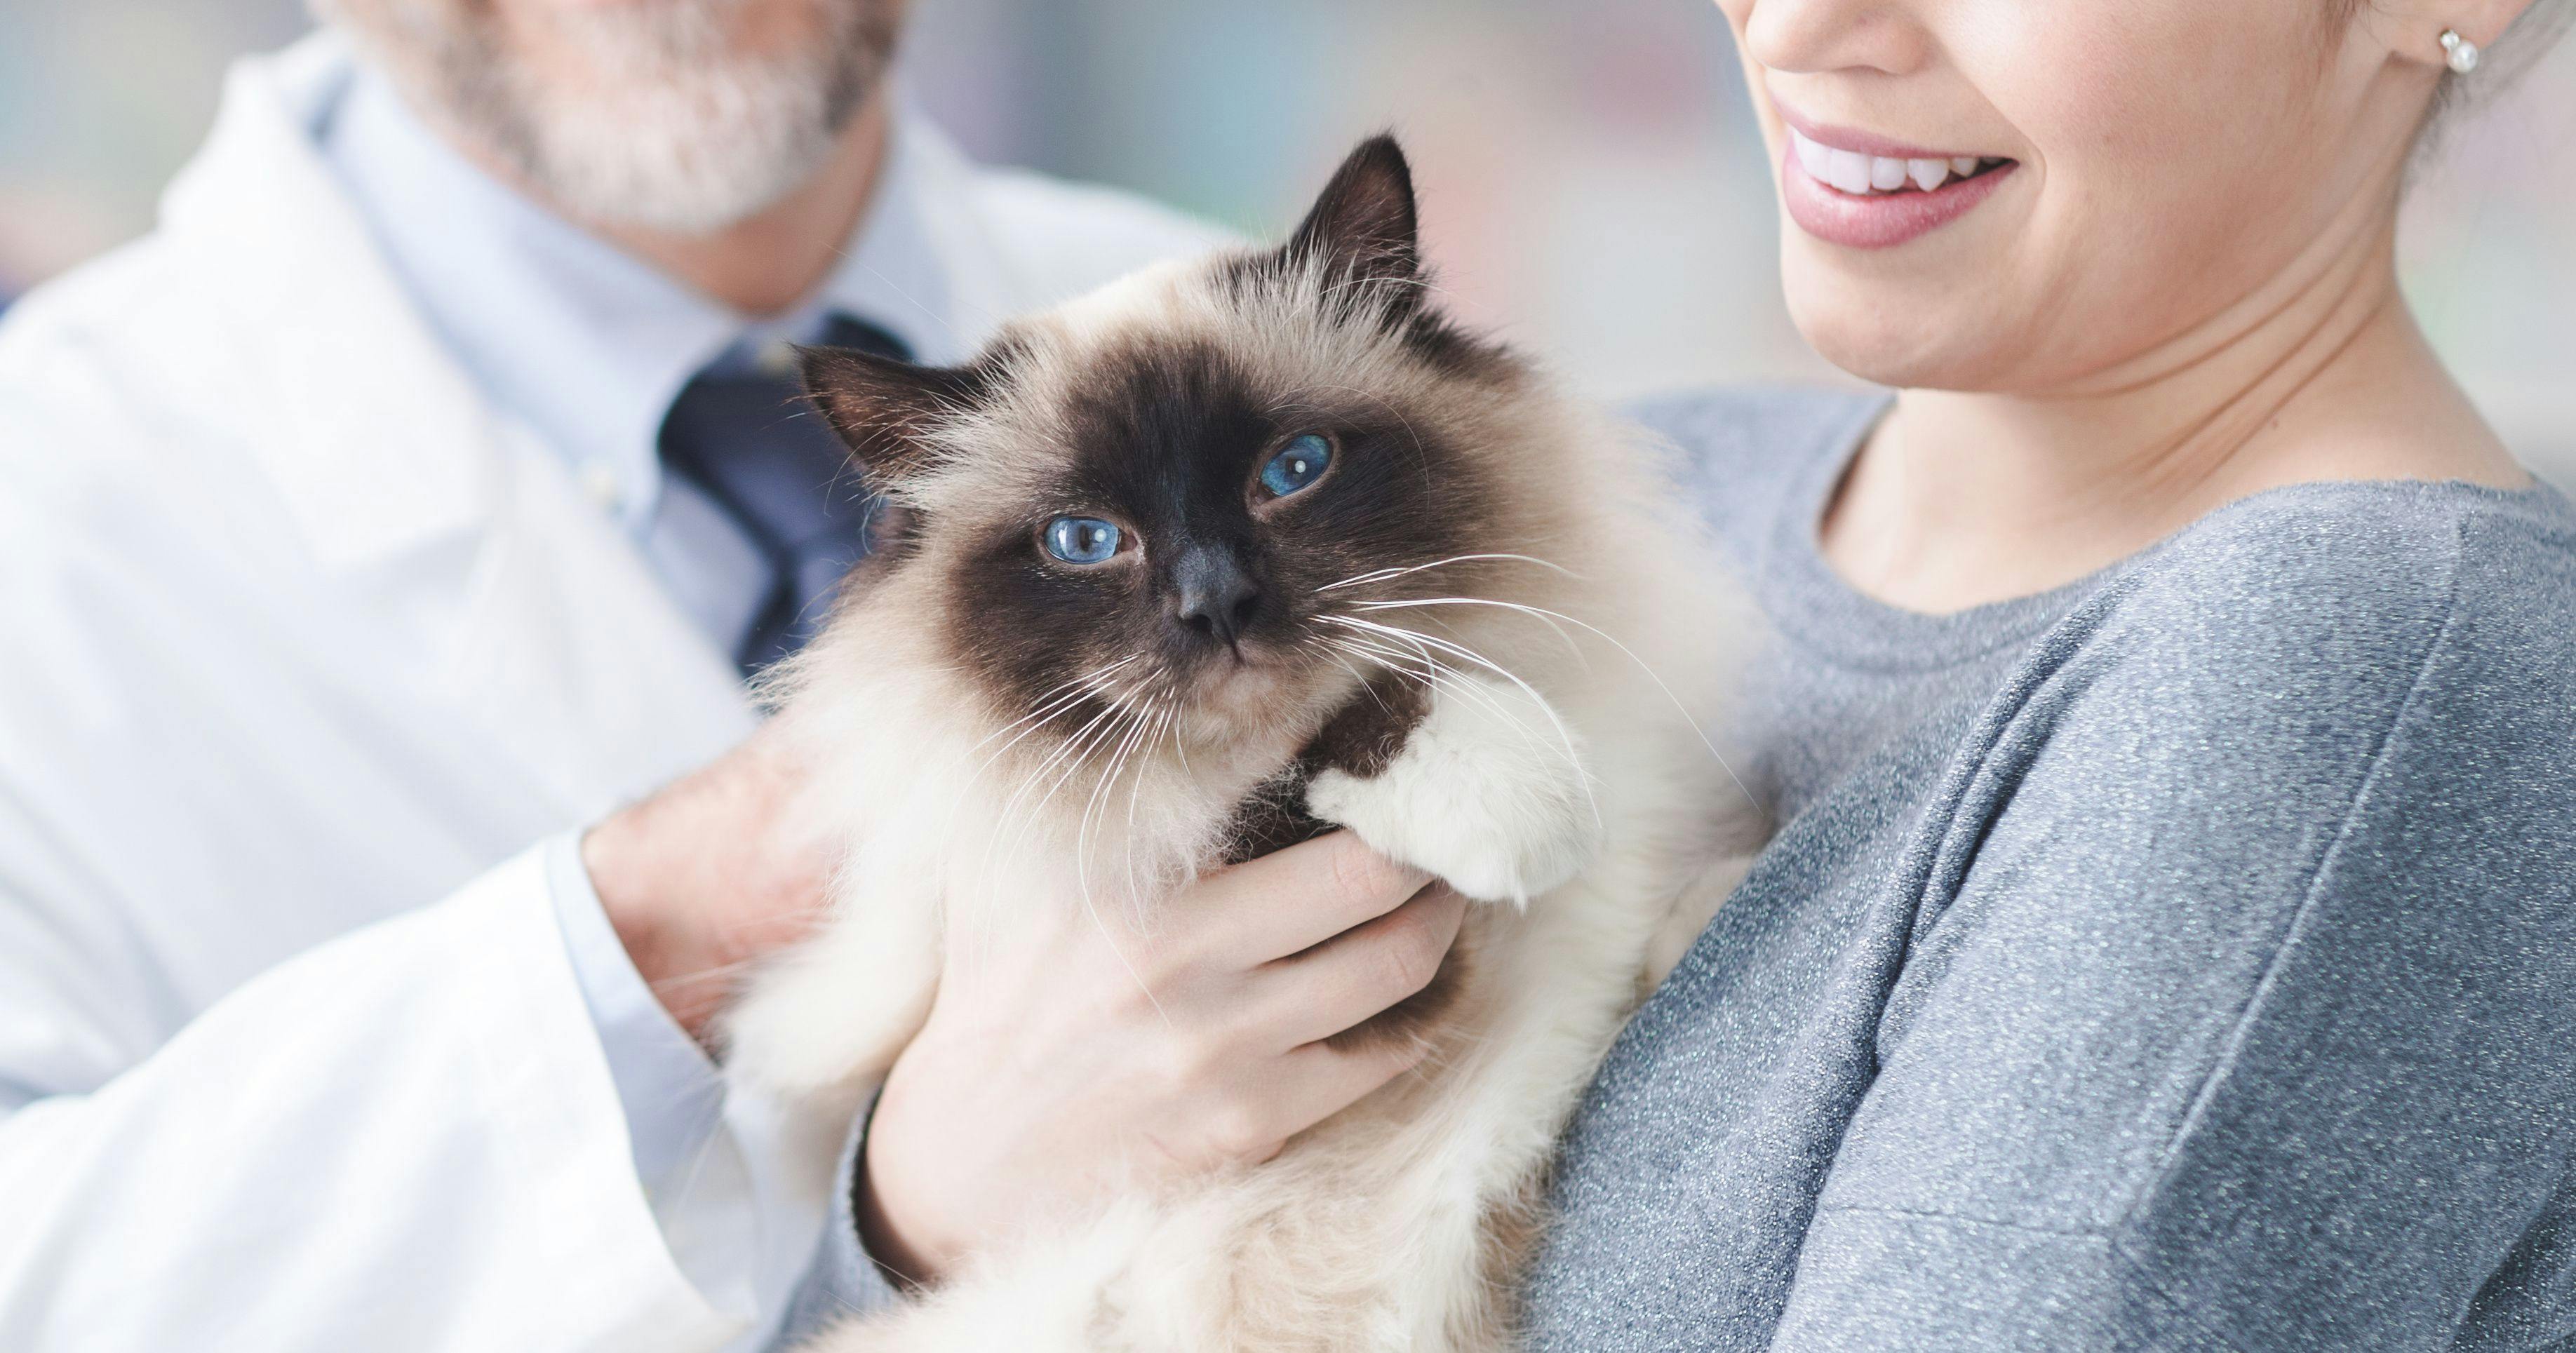 Yes, your pet must visit the veterinary office